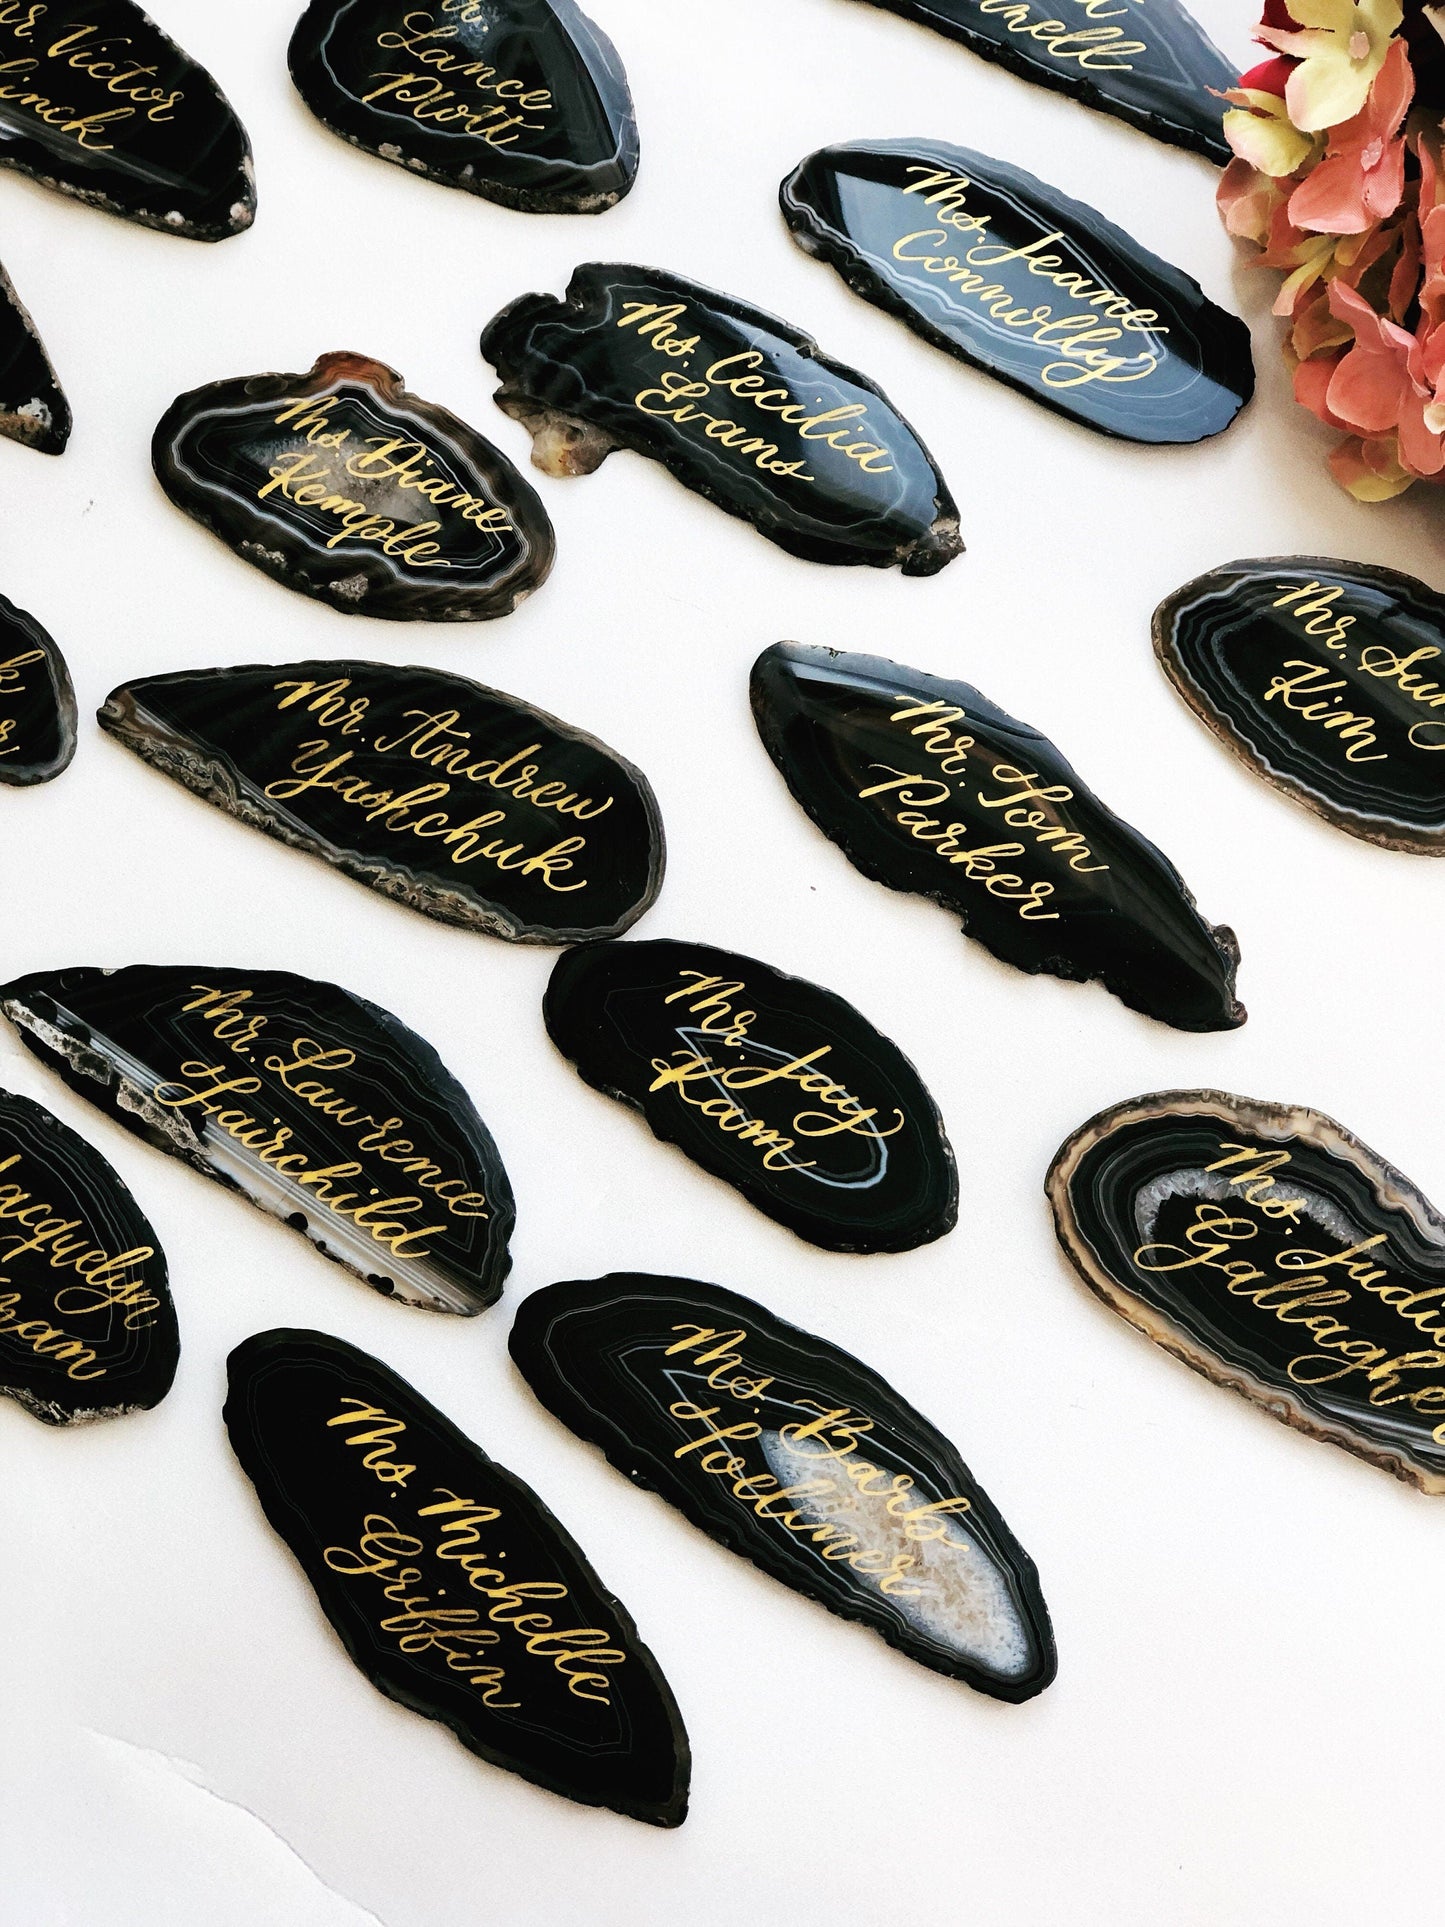 2.5" - 3" Black Agate Slice Calligraphy Name Place Cards | Agate Calligraphy Name Cards